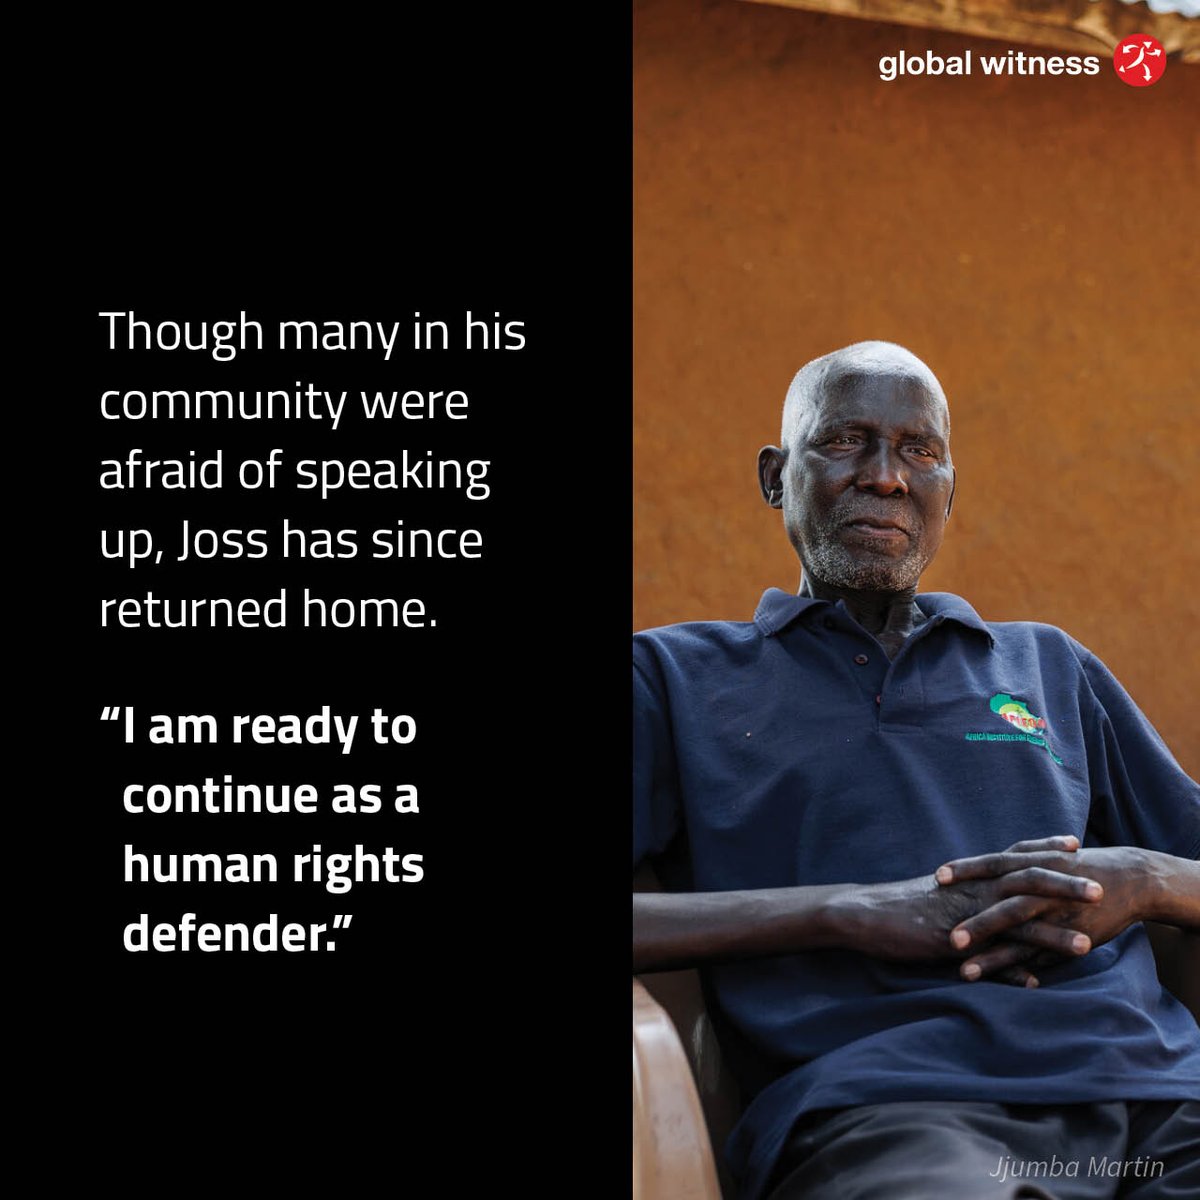 This is Joss - one of many people detained for challenging the devastating new oil pipeline #EACOP But even after six months in brutal prison conditions, he won't stop defending his community from polluters Read stories from the frontlines⬇️ gwitness.org/3uGreUy